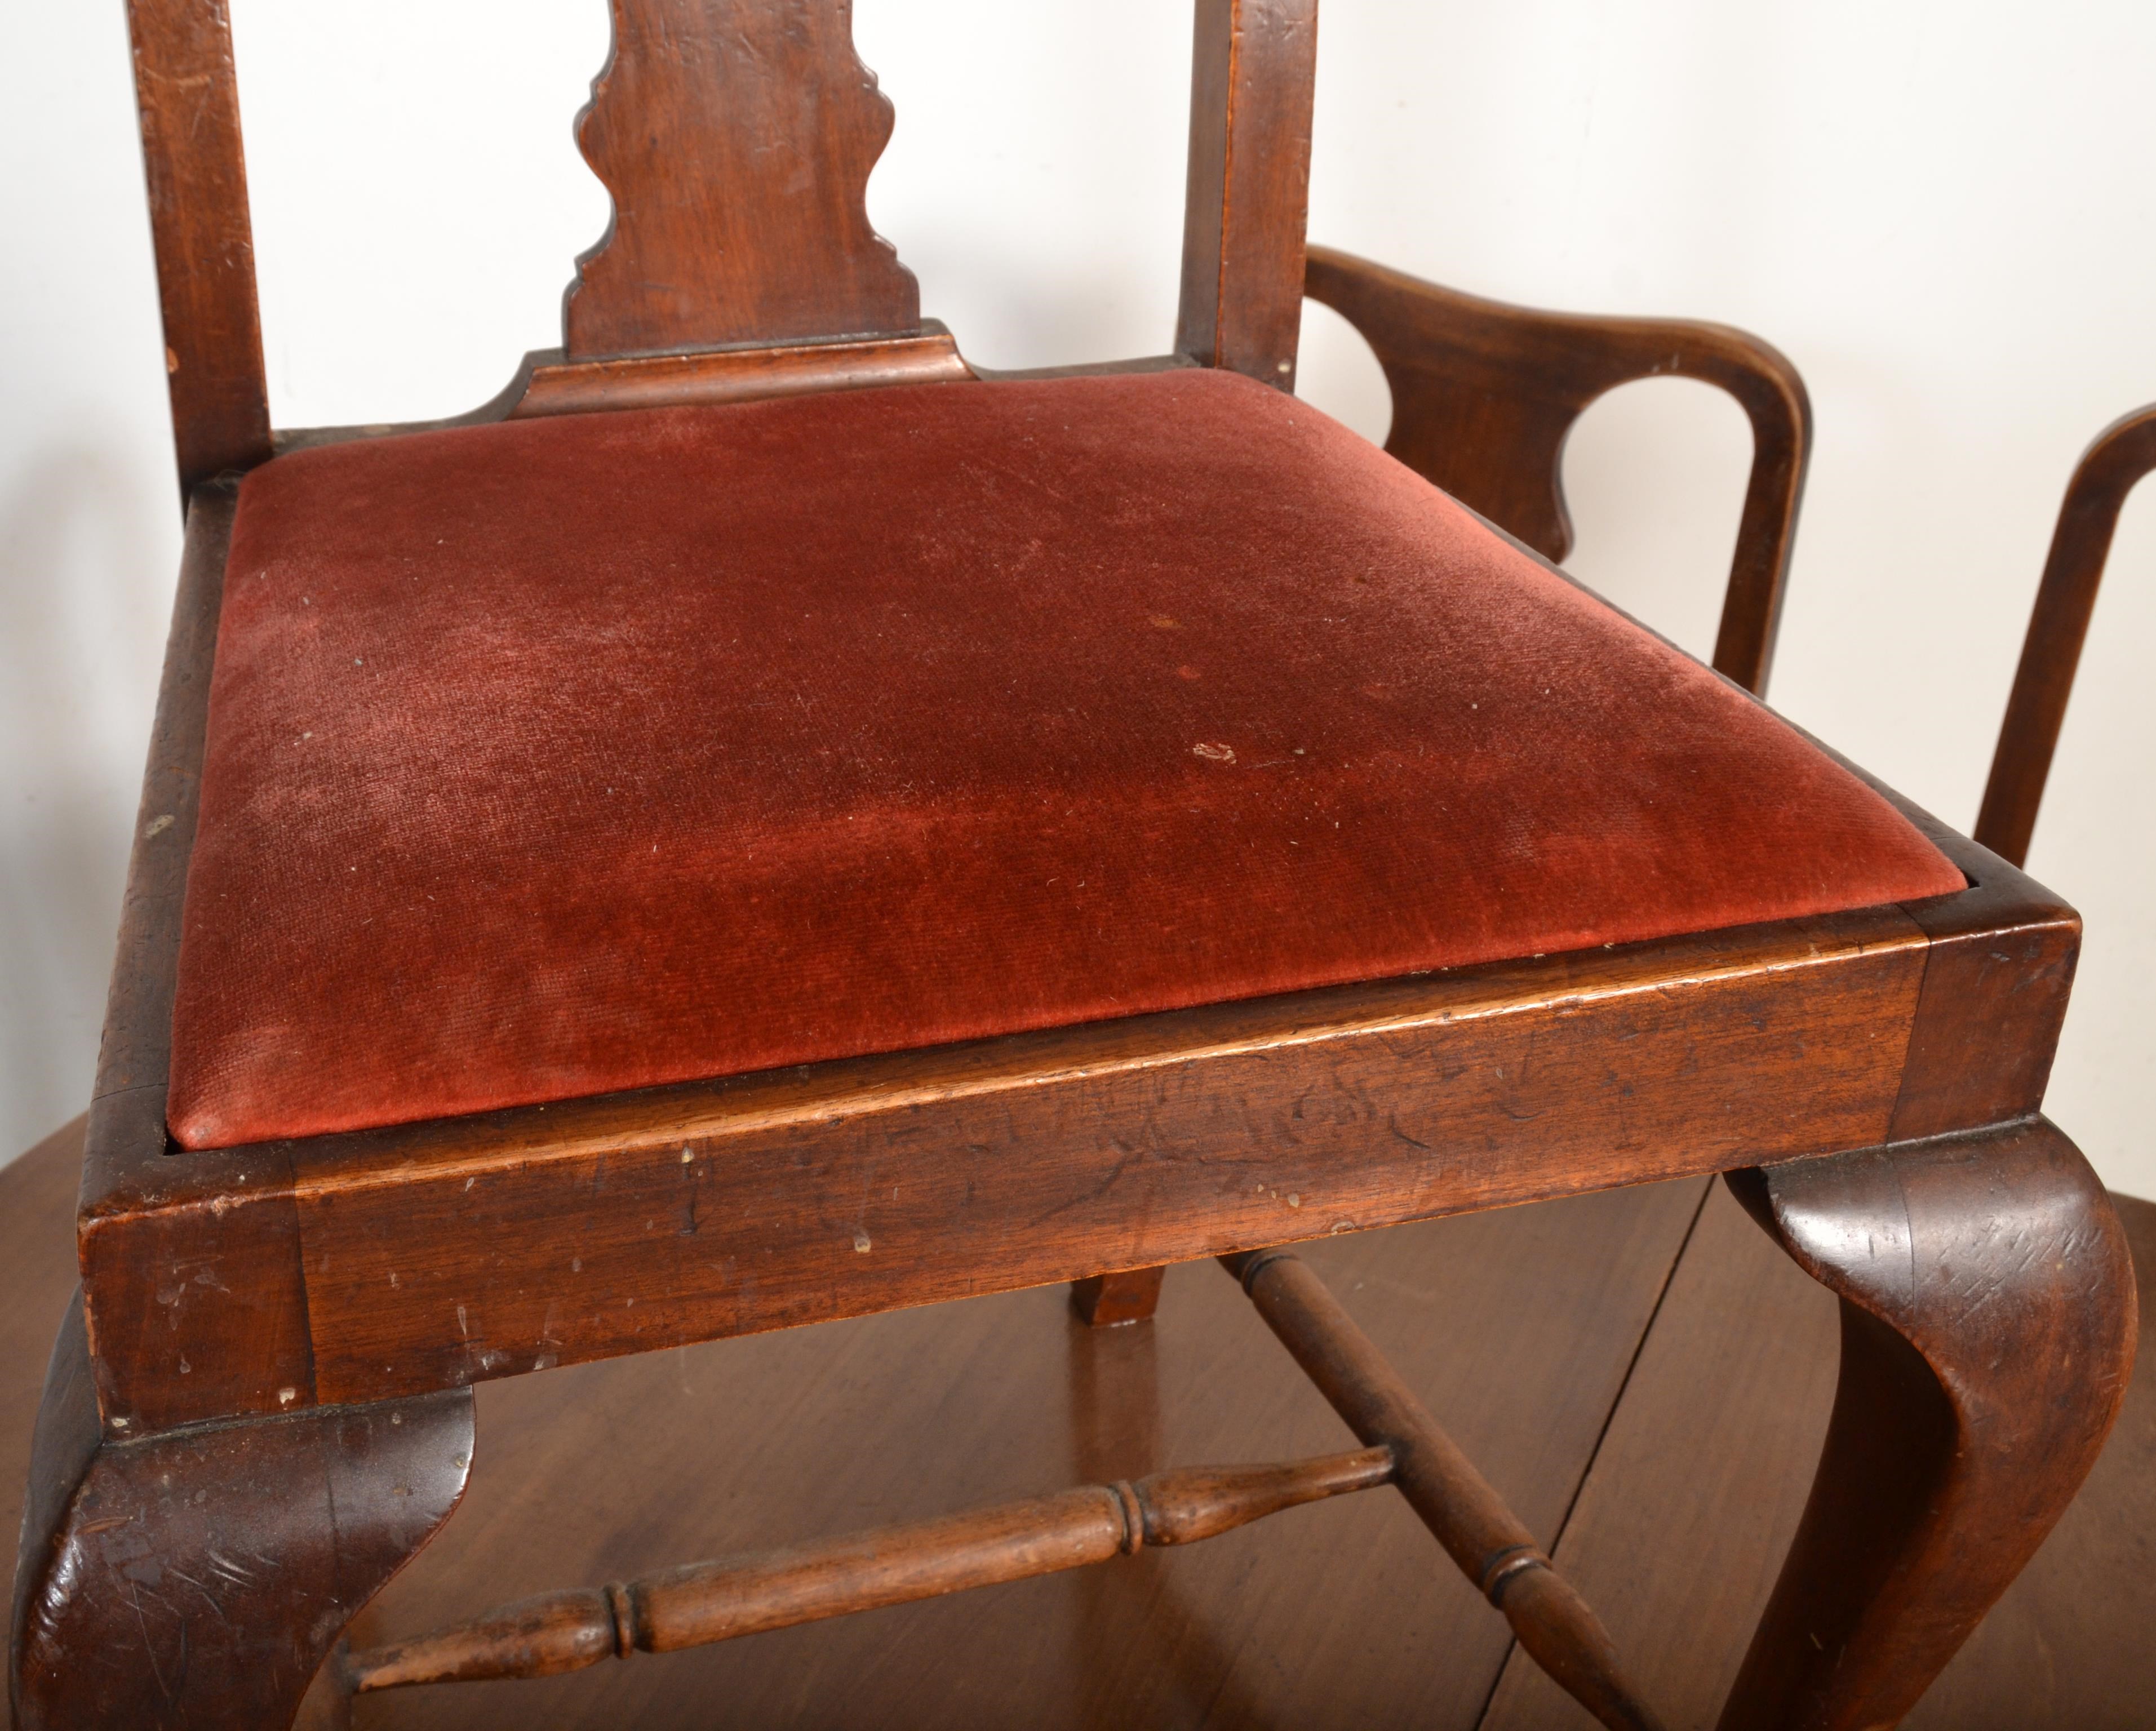 A 1920s mahogany extending dining table with cabriole legs along with 6